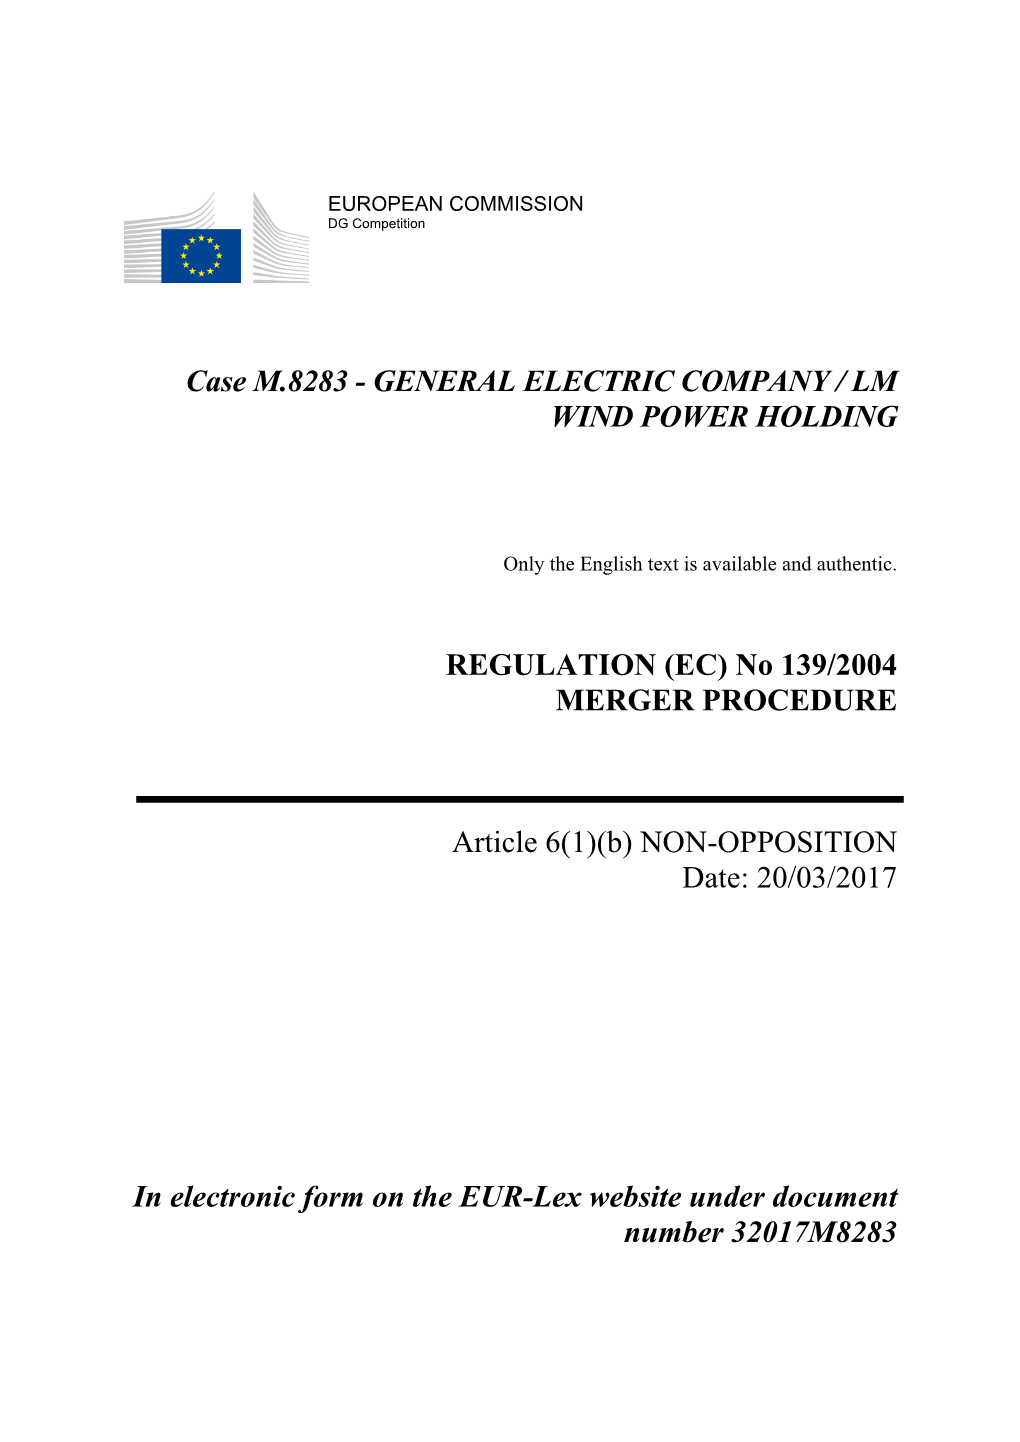 Case M.8283 - GENERAL ELECTRIC COMPANY / LM WIND POWER HOLDING